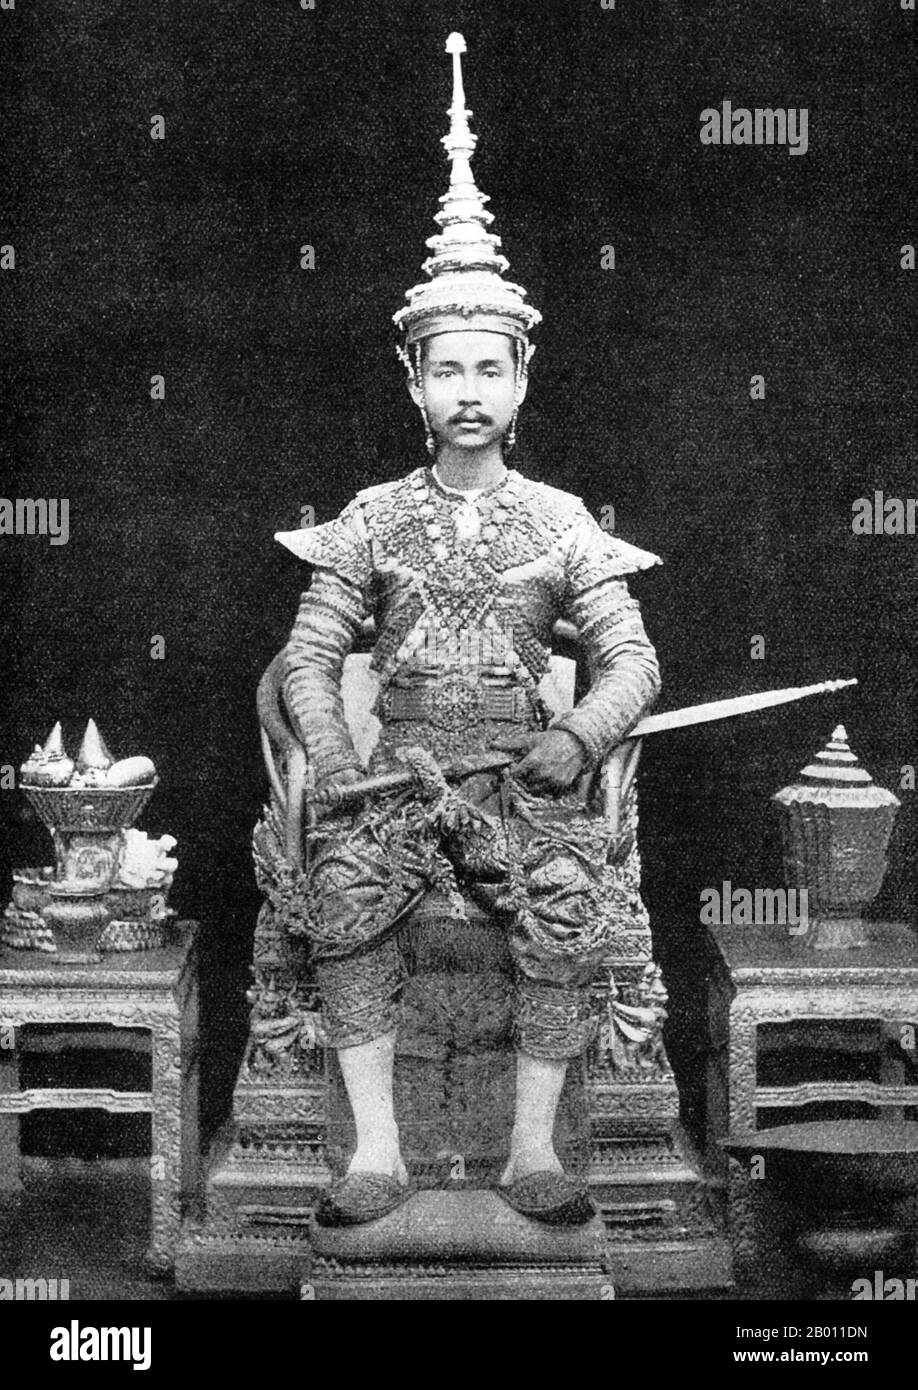 Thailand: King Chulalongkorn sits on his throne dressed in his coronation robes, c. 1880.  King Chulalongkorn, Rama V (1853–1910) was the fifth monarch of Siam under the House of Chakri. He acceded to the throne at the age of 15 after the death of his father, King Mongkut, Rama IV. King Chulalongkorn is considered one of the greatest kings of Siam. His reign was characterized by the modernization of the country, including major governmental and social reforms. He is also credited with saving Siam from being colonized. Stock Photo